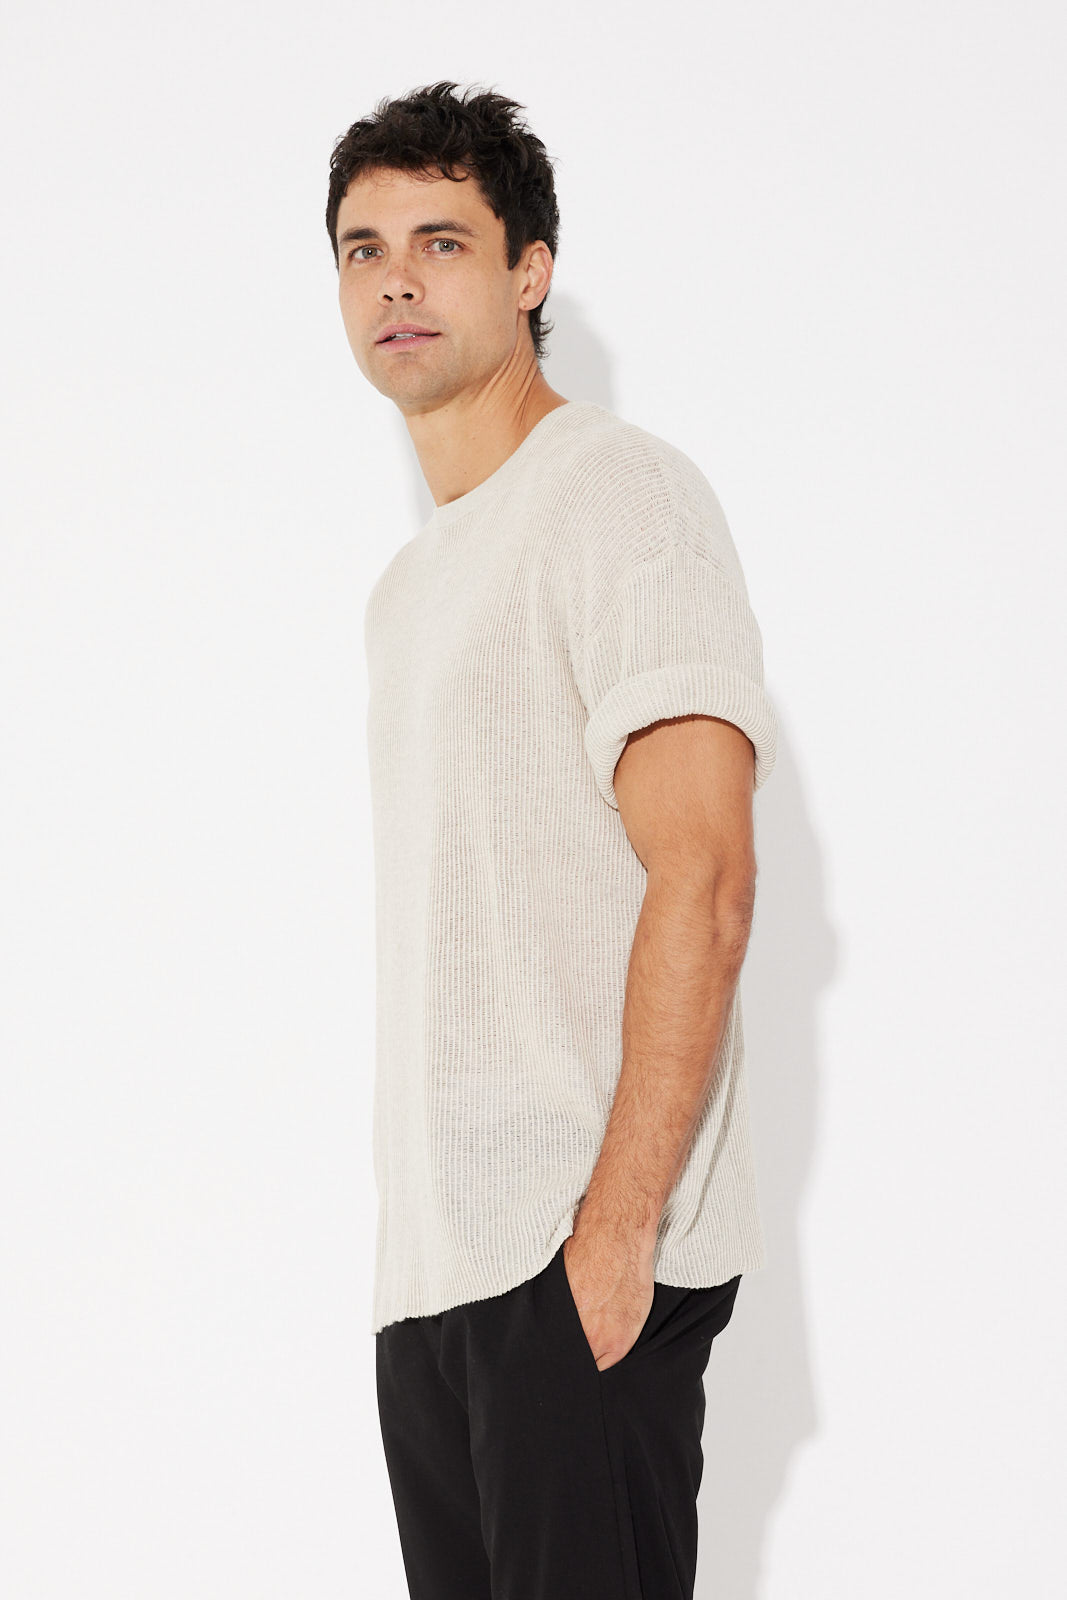 NTH Knitted Crew Tee Oat - FINAL SALE